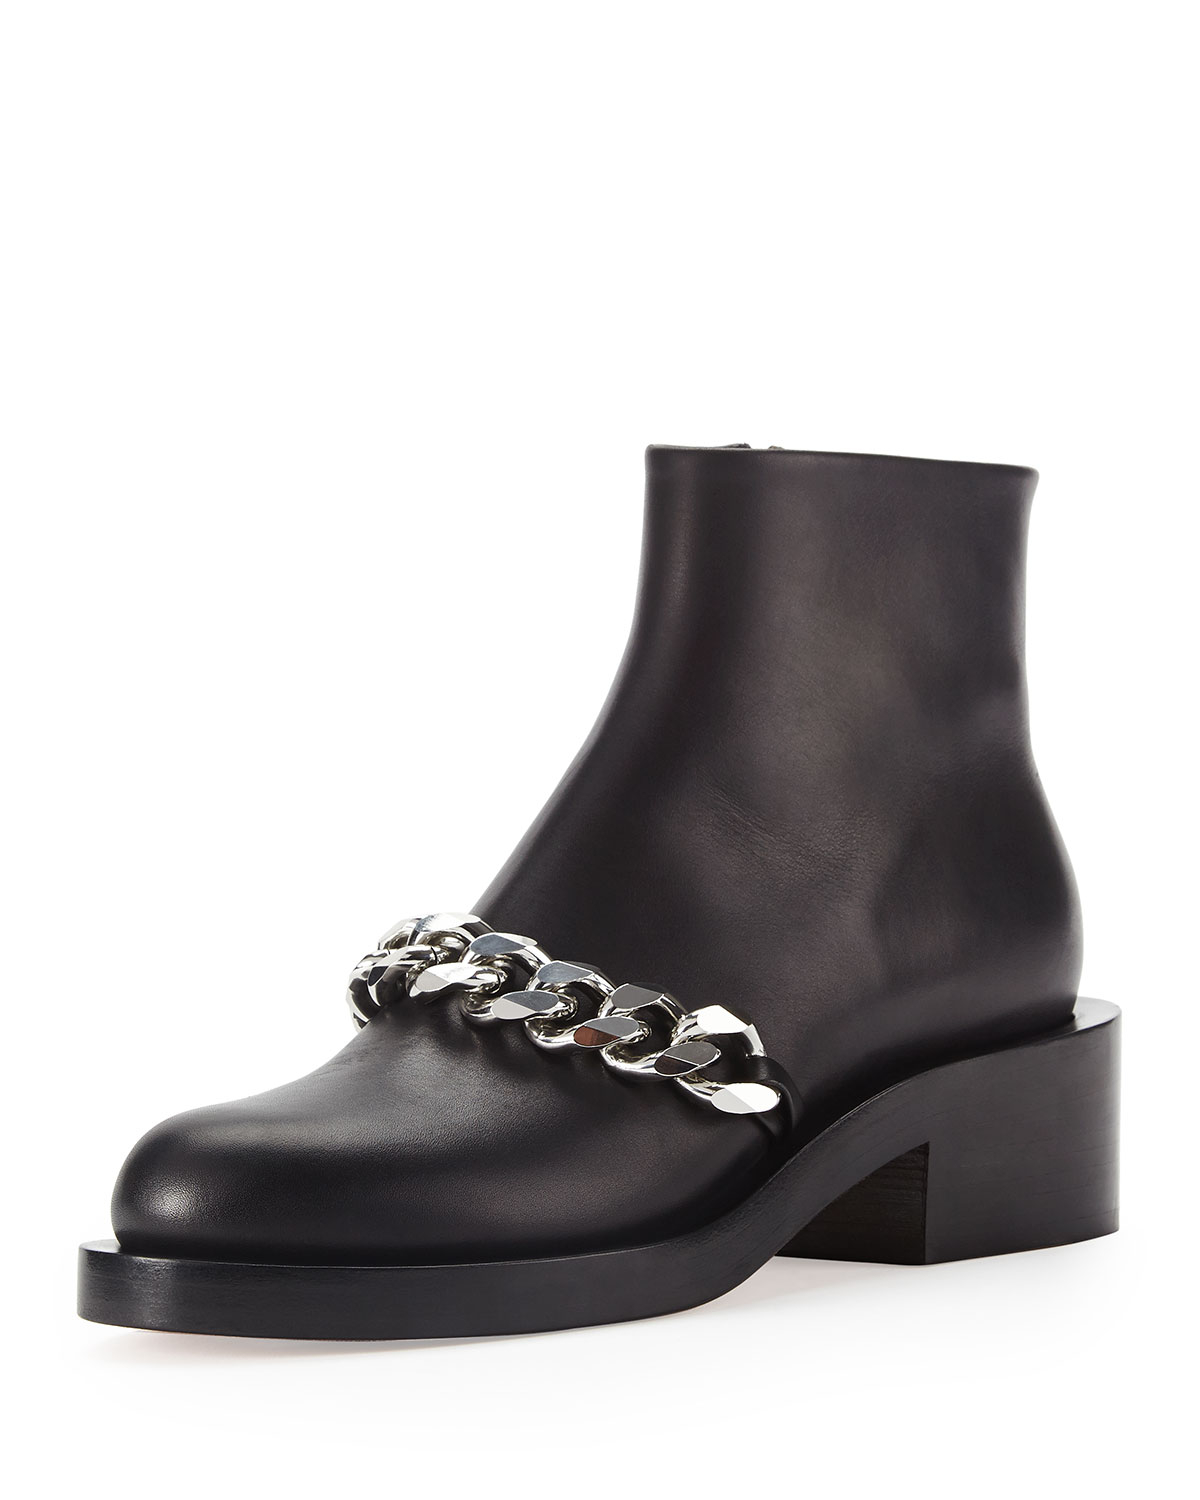 Givenchy Chain Strap Leather Bootie in Black | Lyst